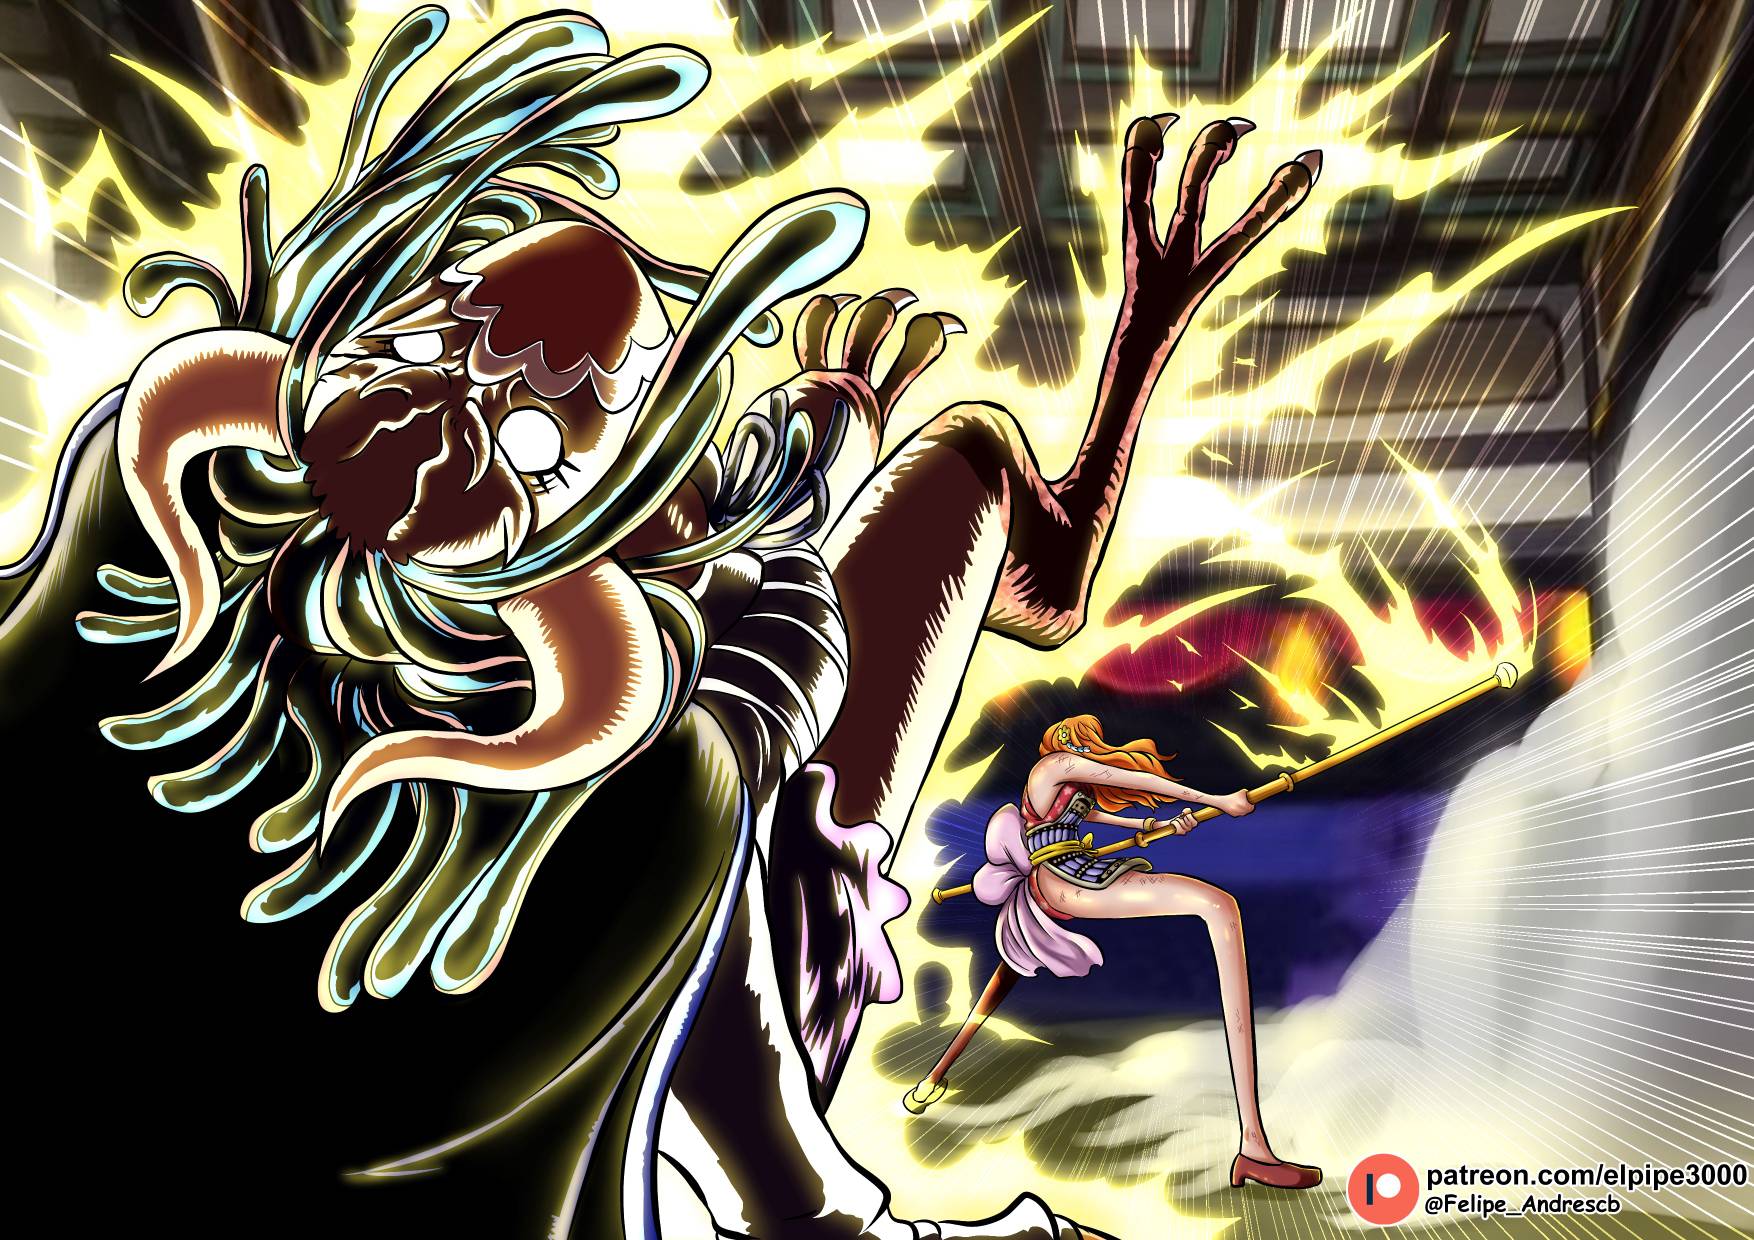 One Piece Chapter 1016 – Nami VS Ulti: Electric Reverberation